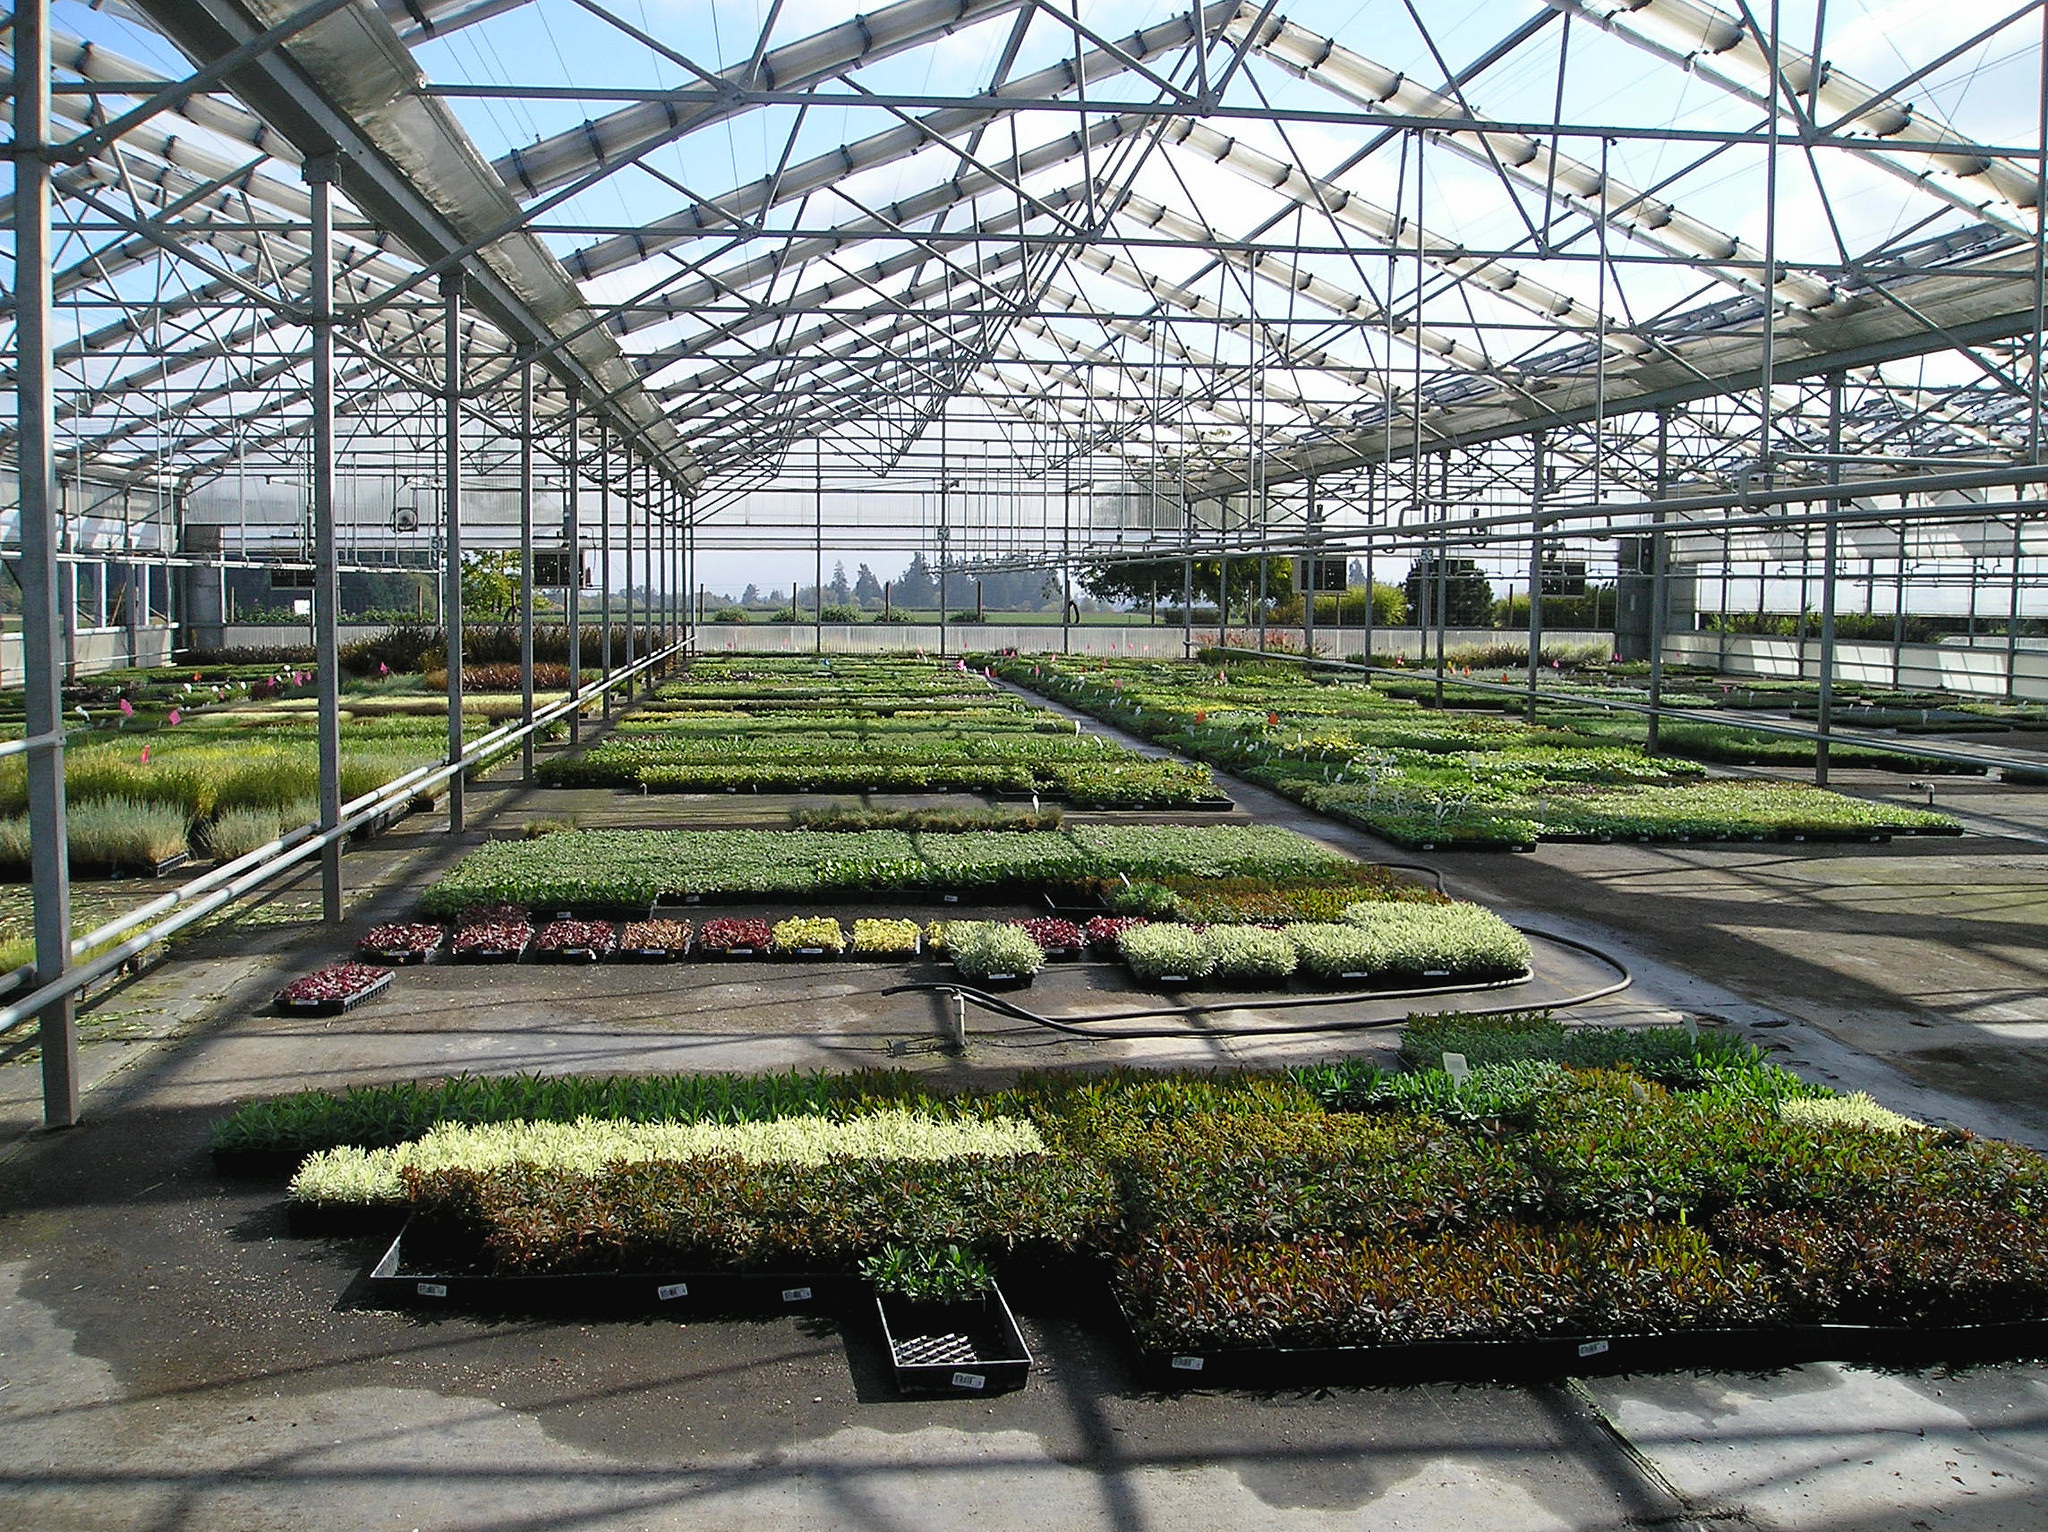 The Other Greenhouse Effect: Examining Energy Usage in Greenhouses